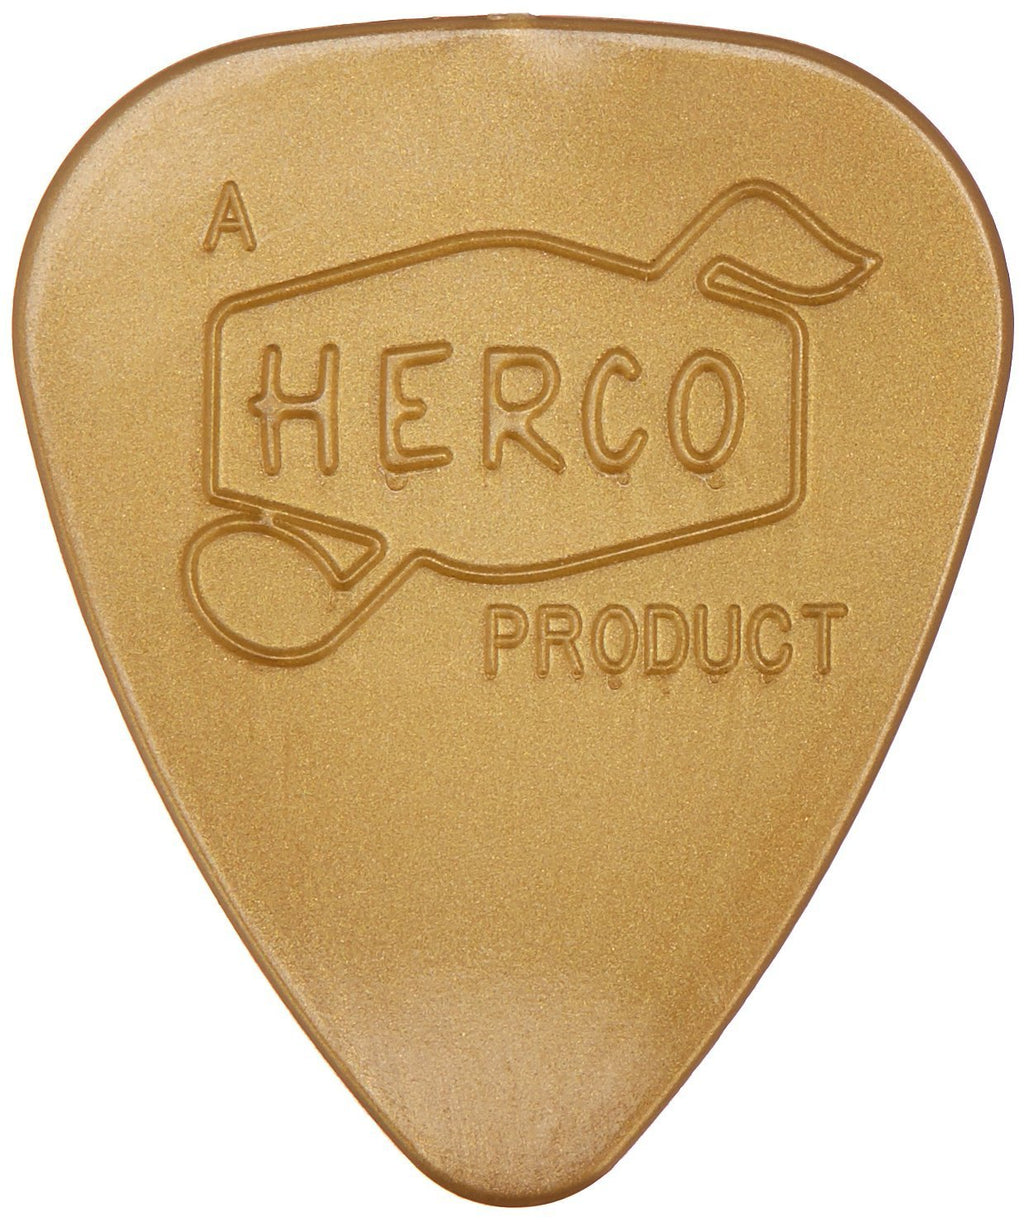 Herco HEV210P Vintage '66, Gold, Light, 6/Player's Pack